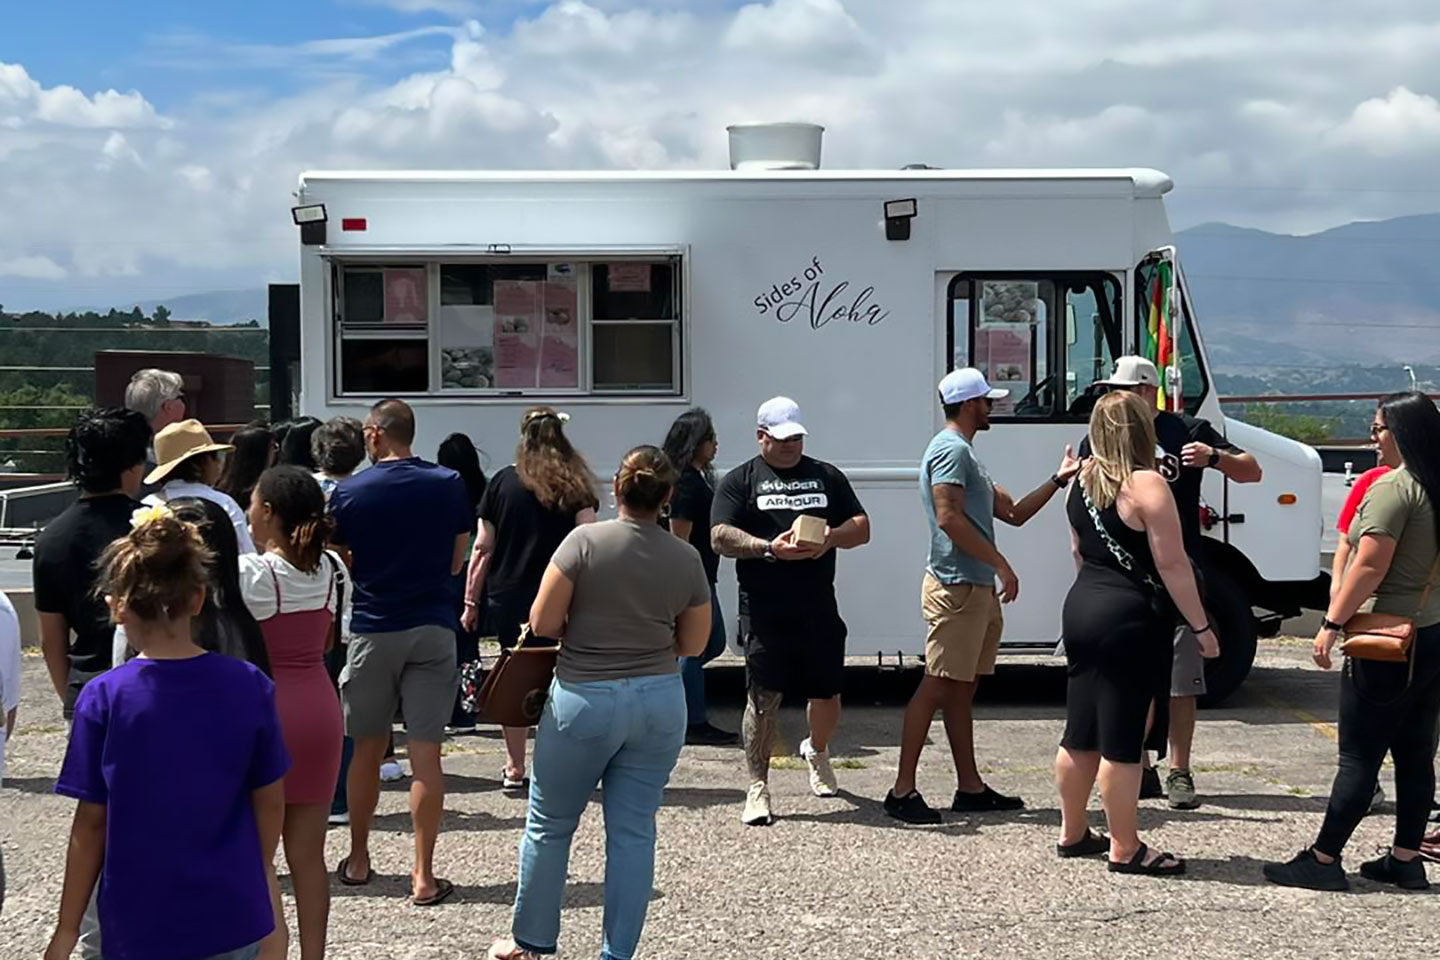 Sides of Aloha offers baked goods & desserts that will tantalize your taste buds straight from the islands of Hawaii.
https://www.facebook.com/SidesOfAloha